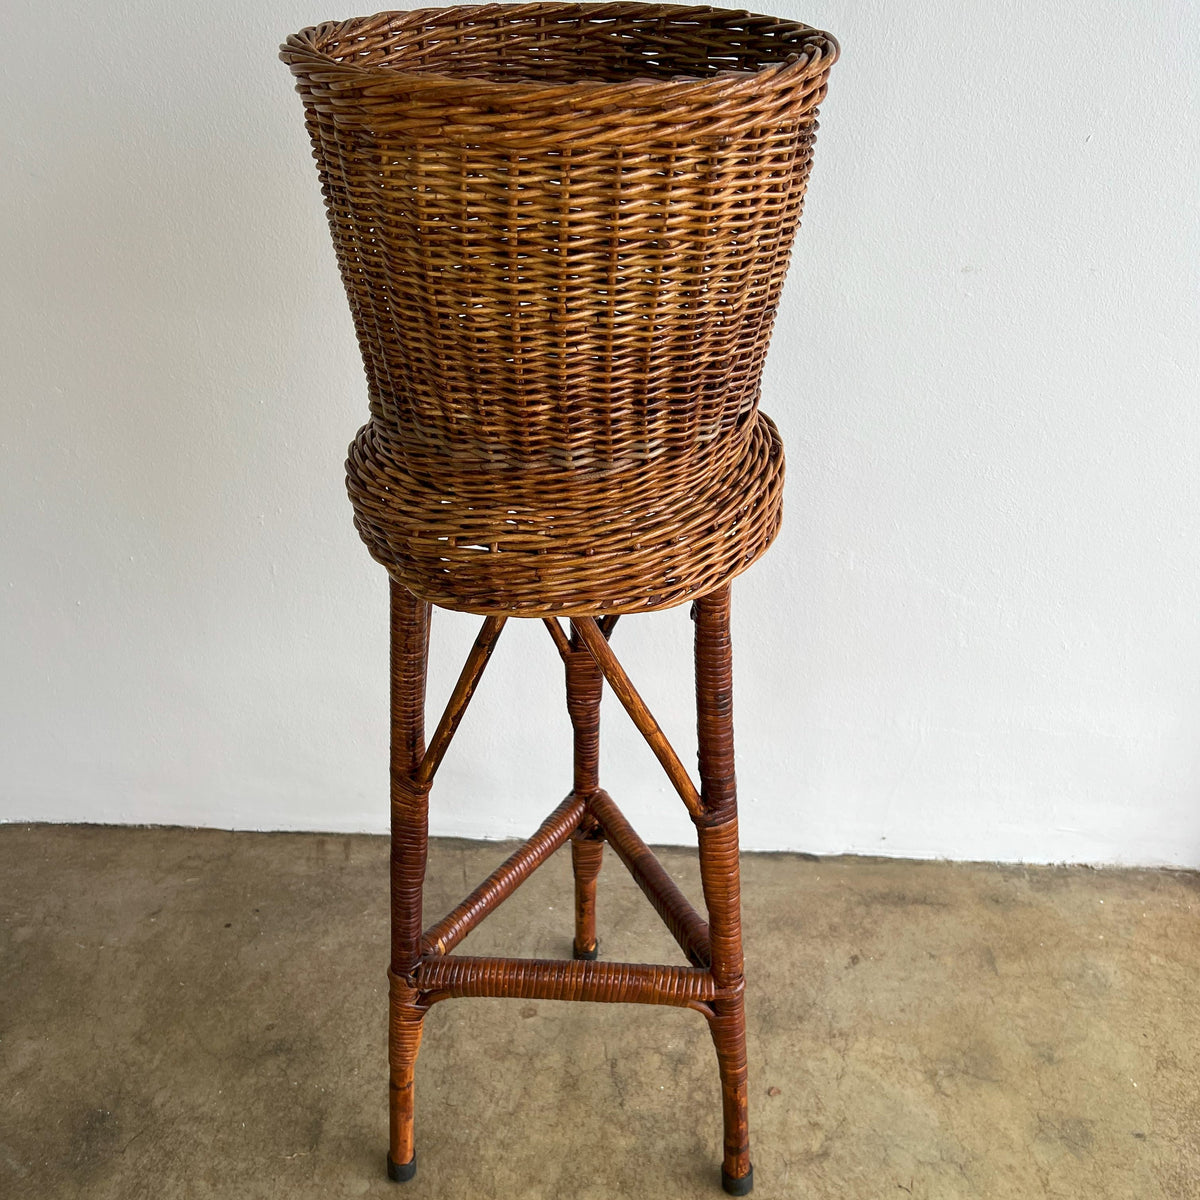 Woven Planter Basket - The Finishing Store South Africa